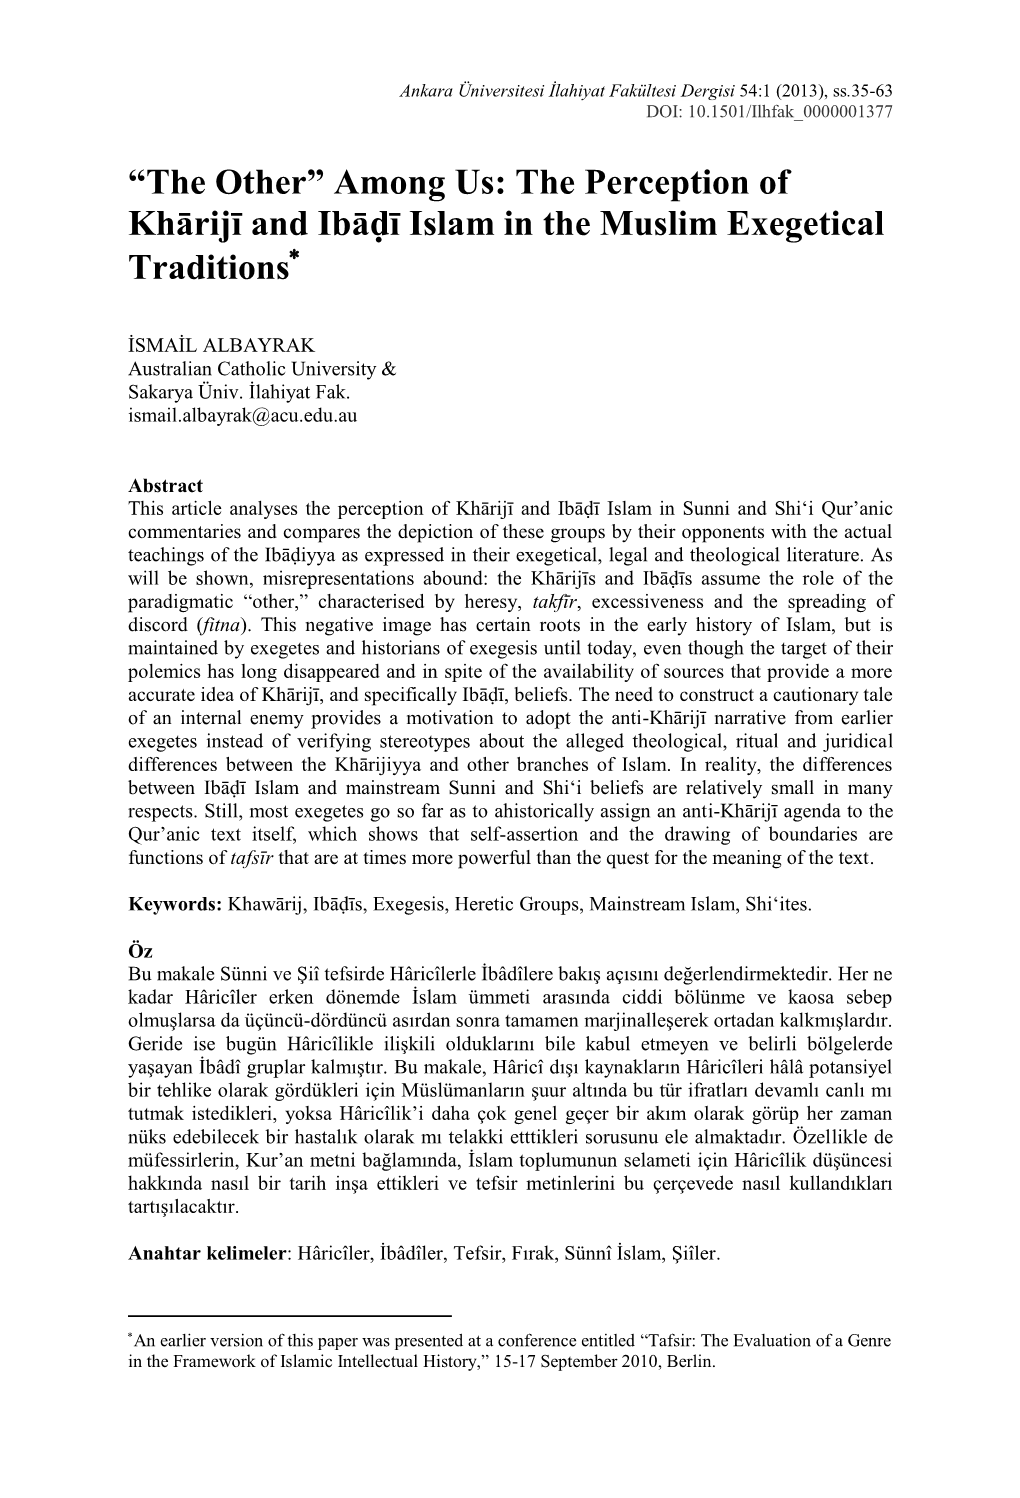 The Perception of Khārijī and Ibāḍī Islam in the Muslim Exegetical Traditions